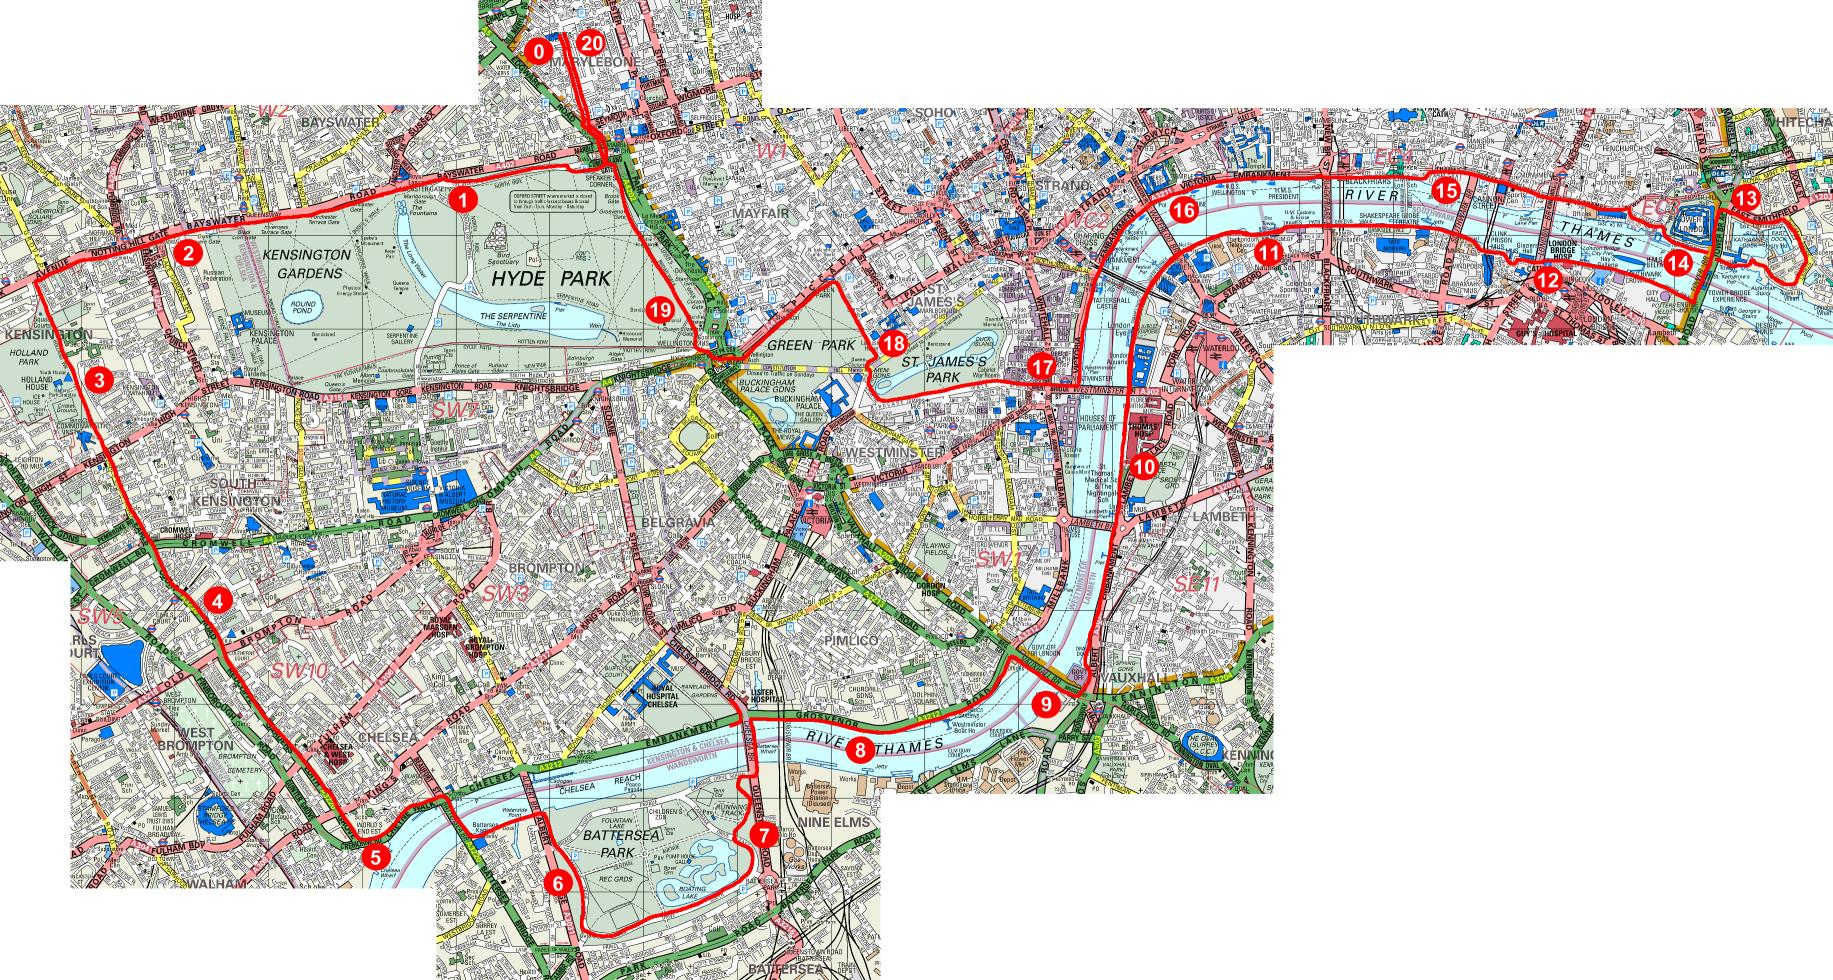 Kensington, Battersea and Tower route map